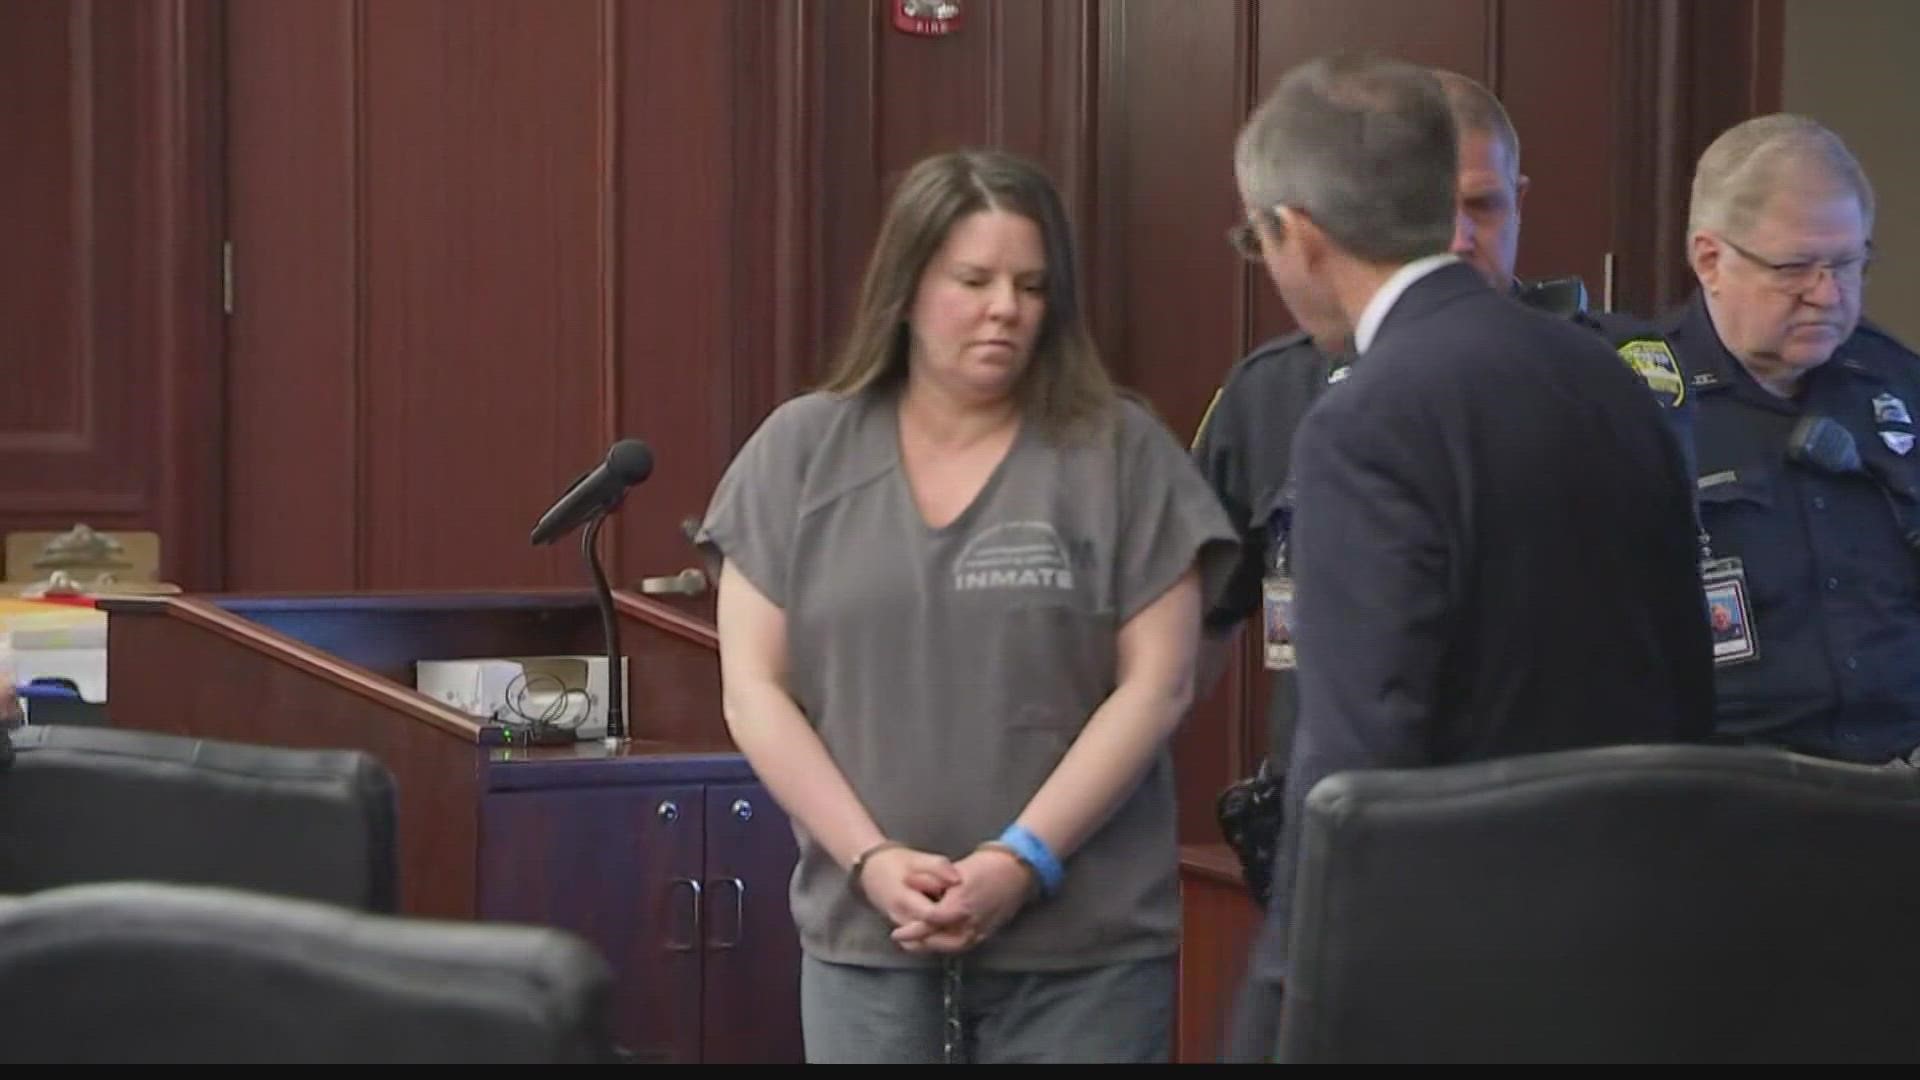 Amy Oliver was accused of dosing her son with a lethal amount of sedatives in October 2020. She was sentenced Friday morning in Duval County Court.